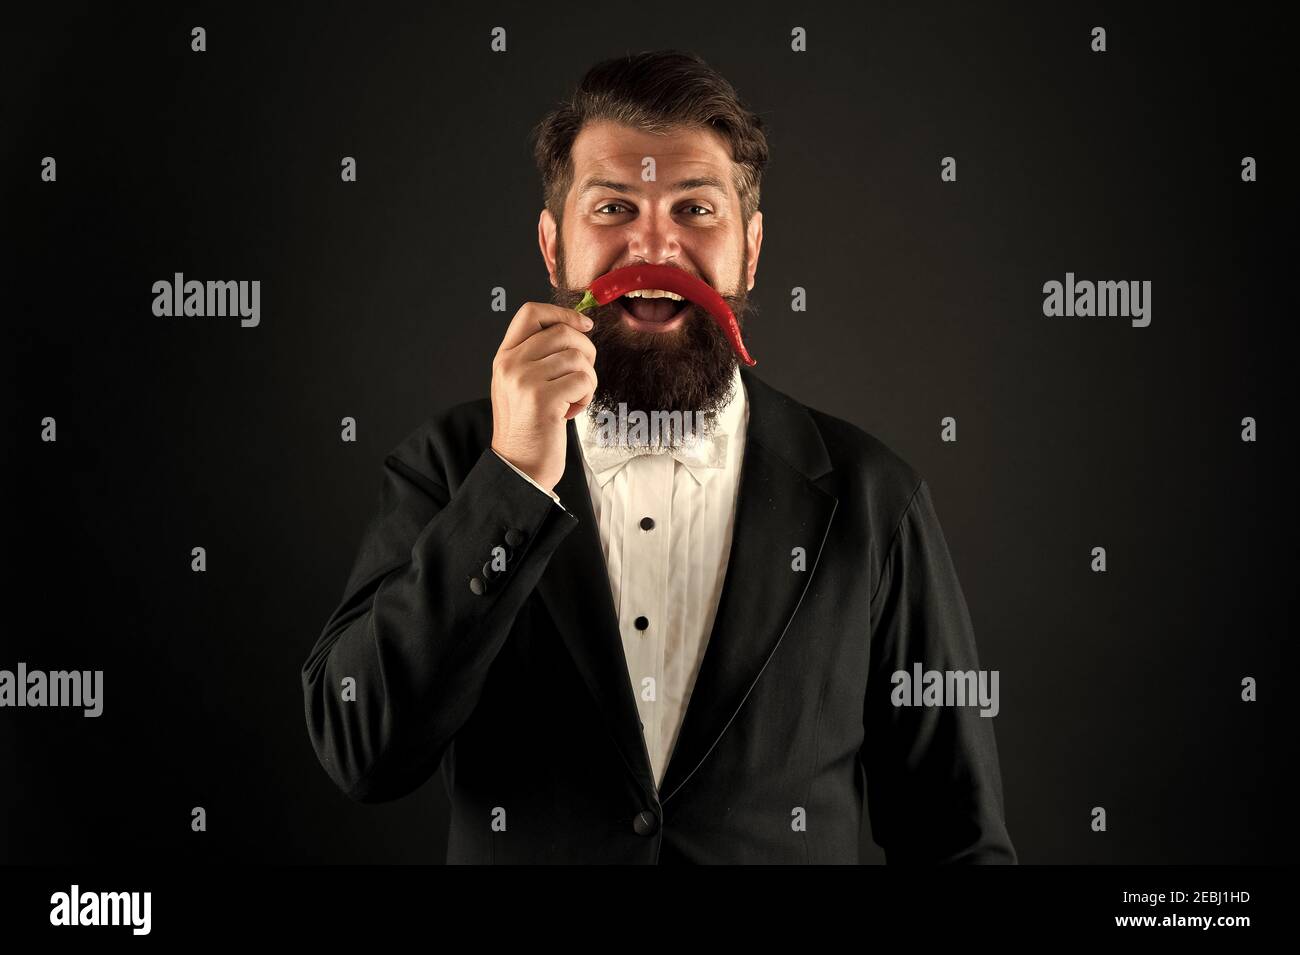 Handsome macho likes spicy taste. Man hold pepper harvest. Barber funny face. Pepper mustache. Bearded businessman hold chilli red pepper in hand. Guy hold Hot chilli pepper black background. Stock Photo